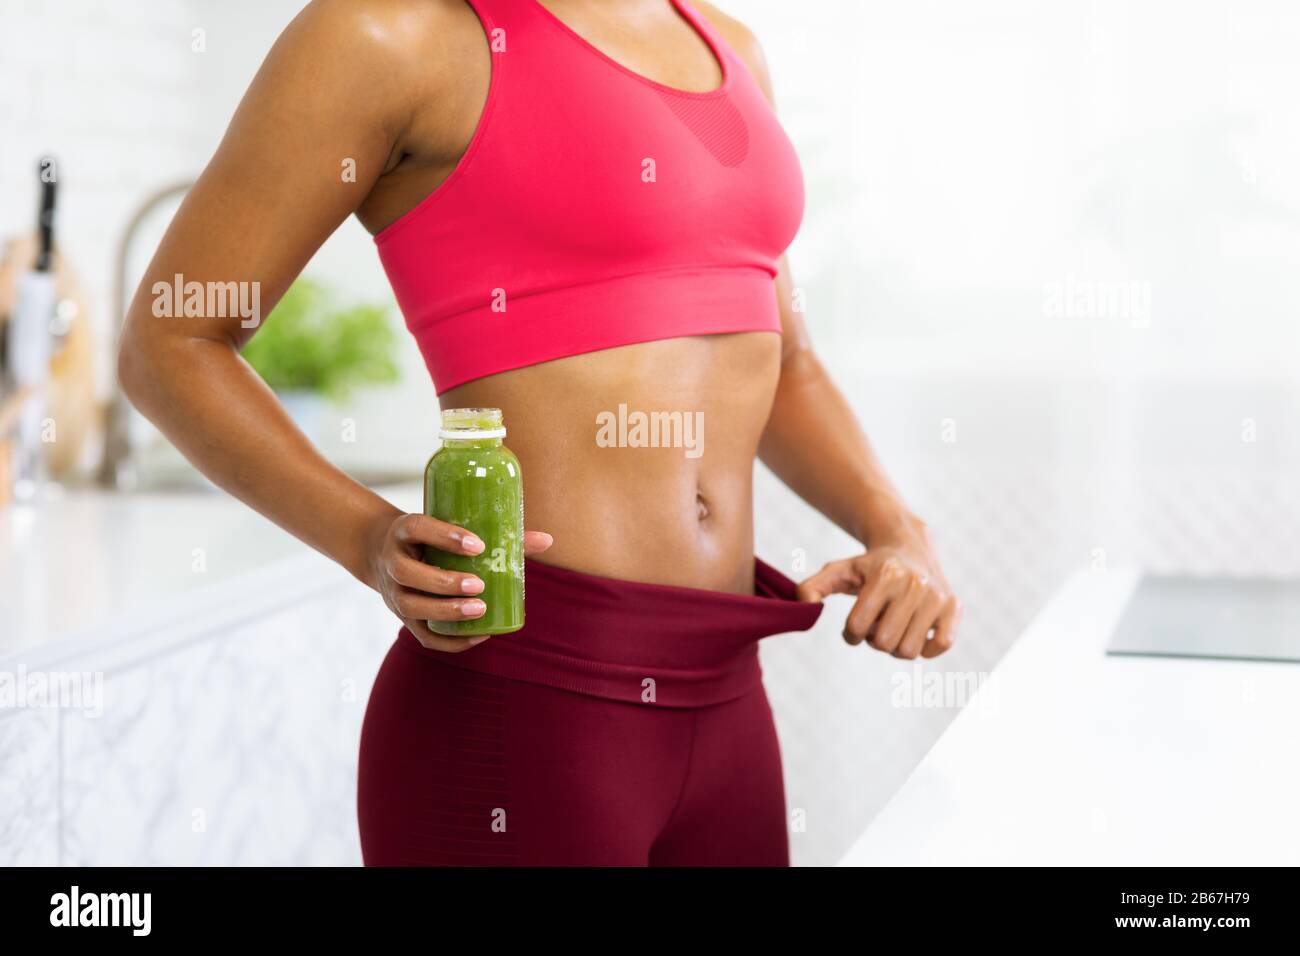 https://c8.alamy.com/comp/2B67H79/fit-afro-girl-in-oversize-pants-holding-detox-smoothie-2B67H79.jpg